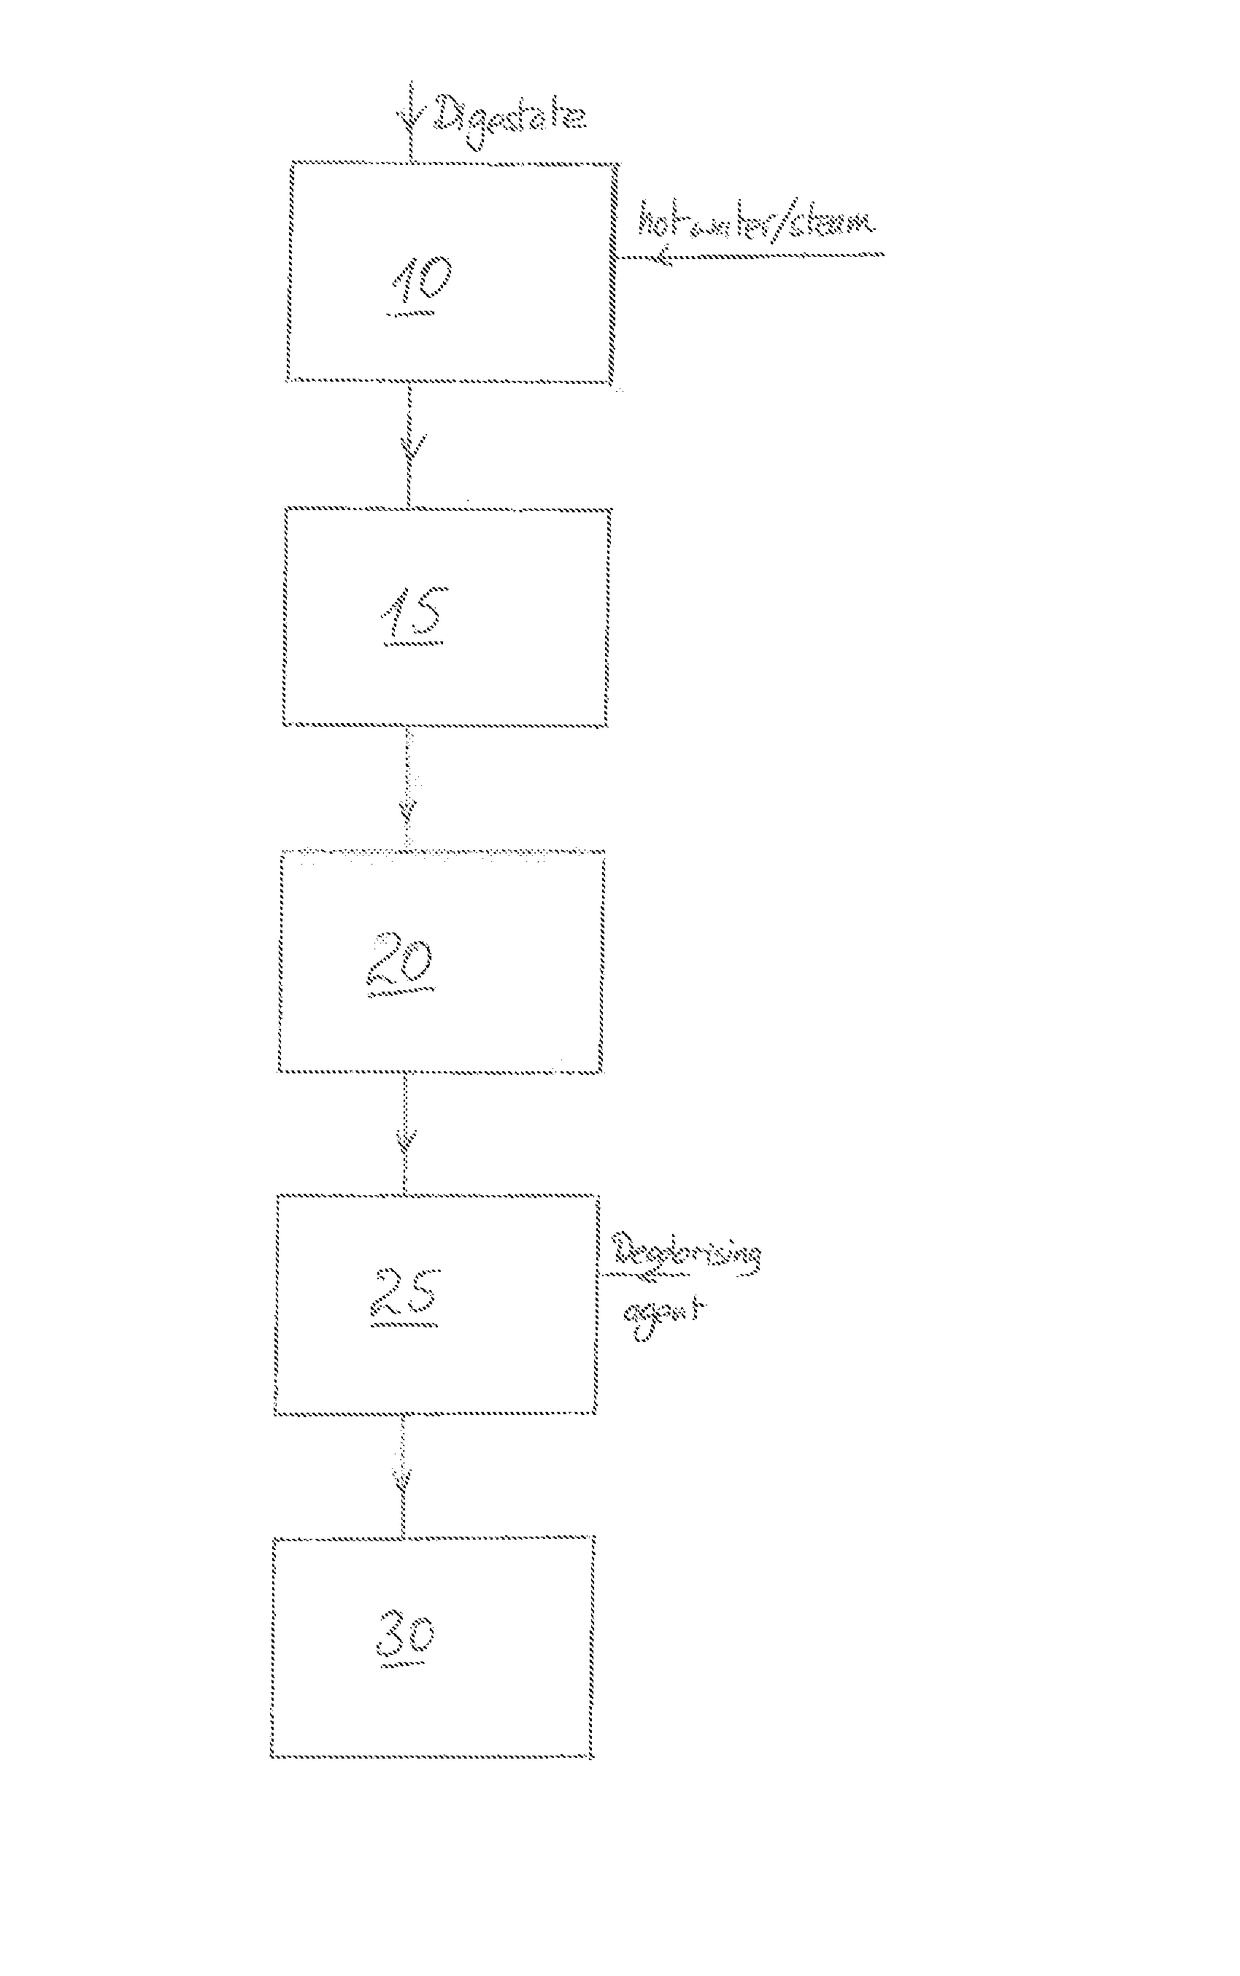 Method for producing a fertilisation product